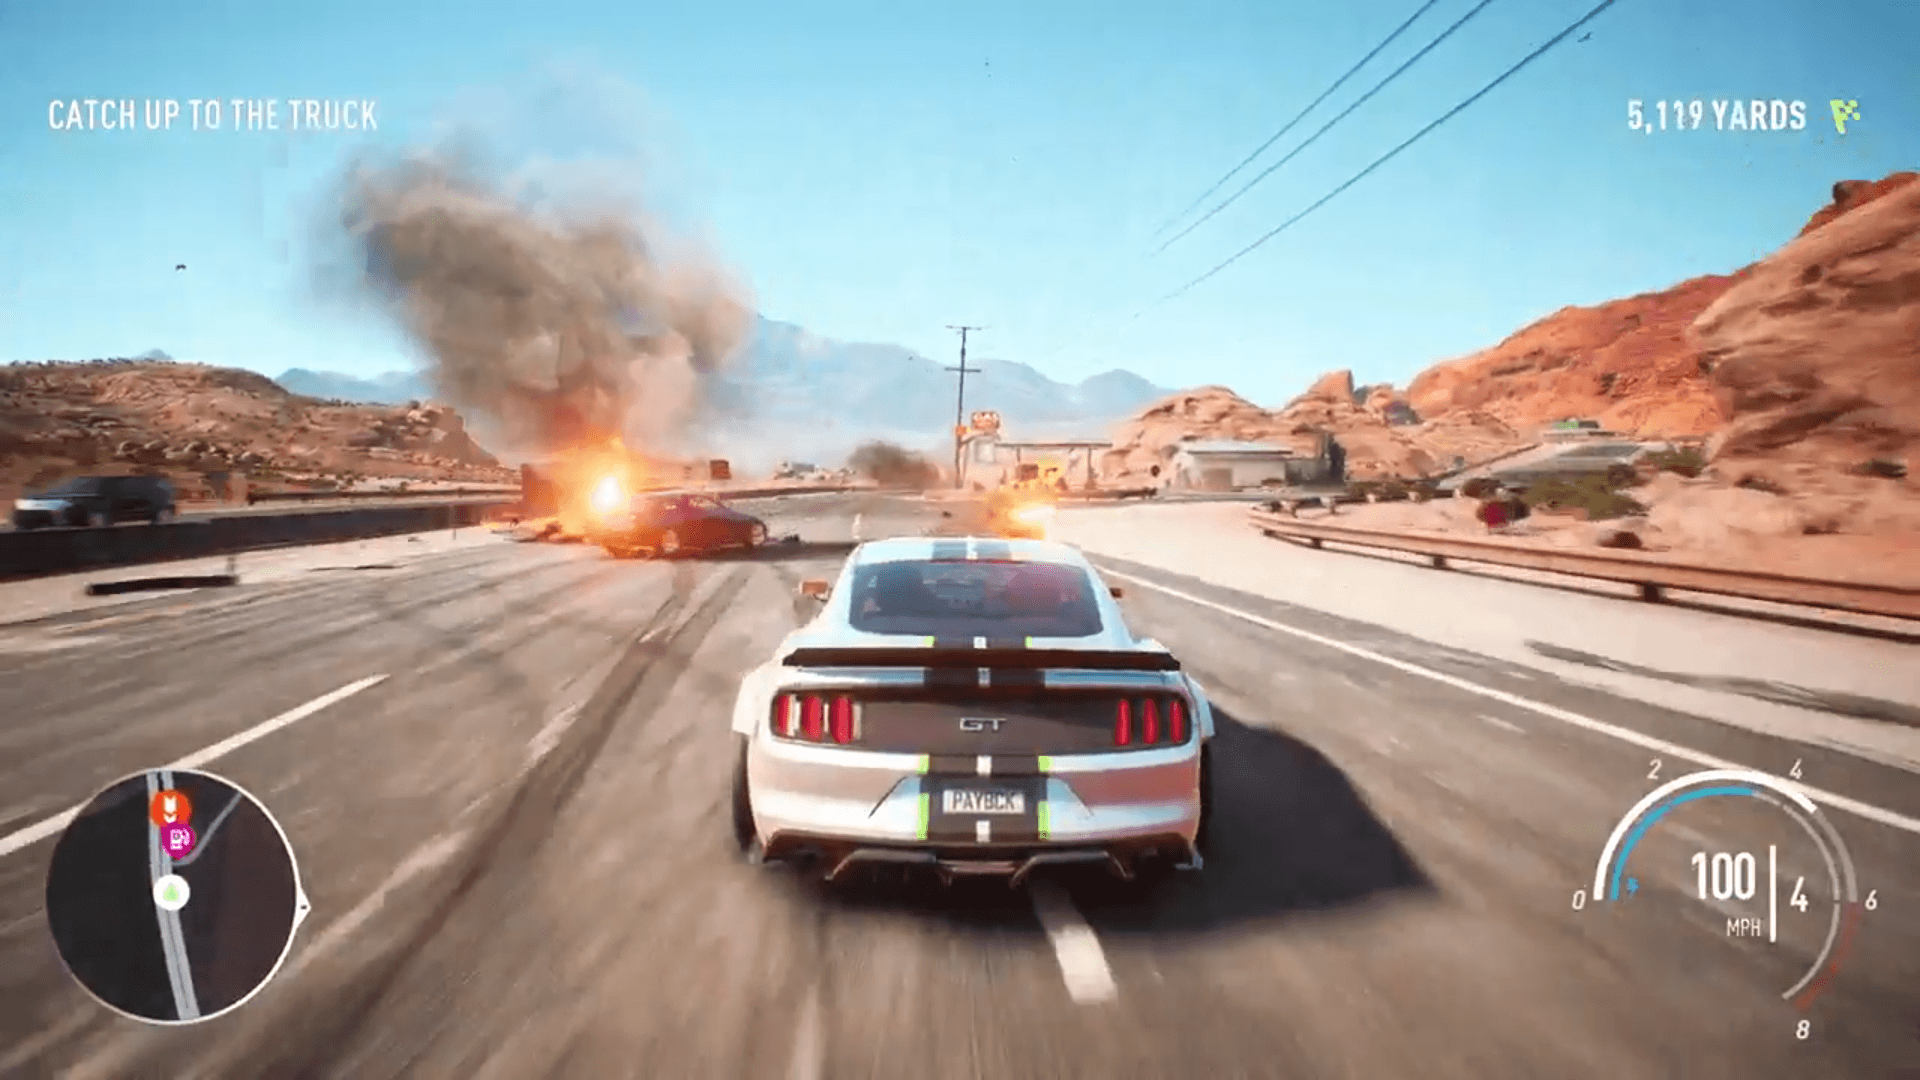 720p need for speed payback backgrounds